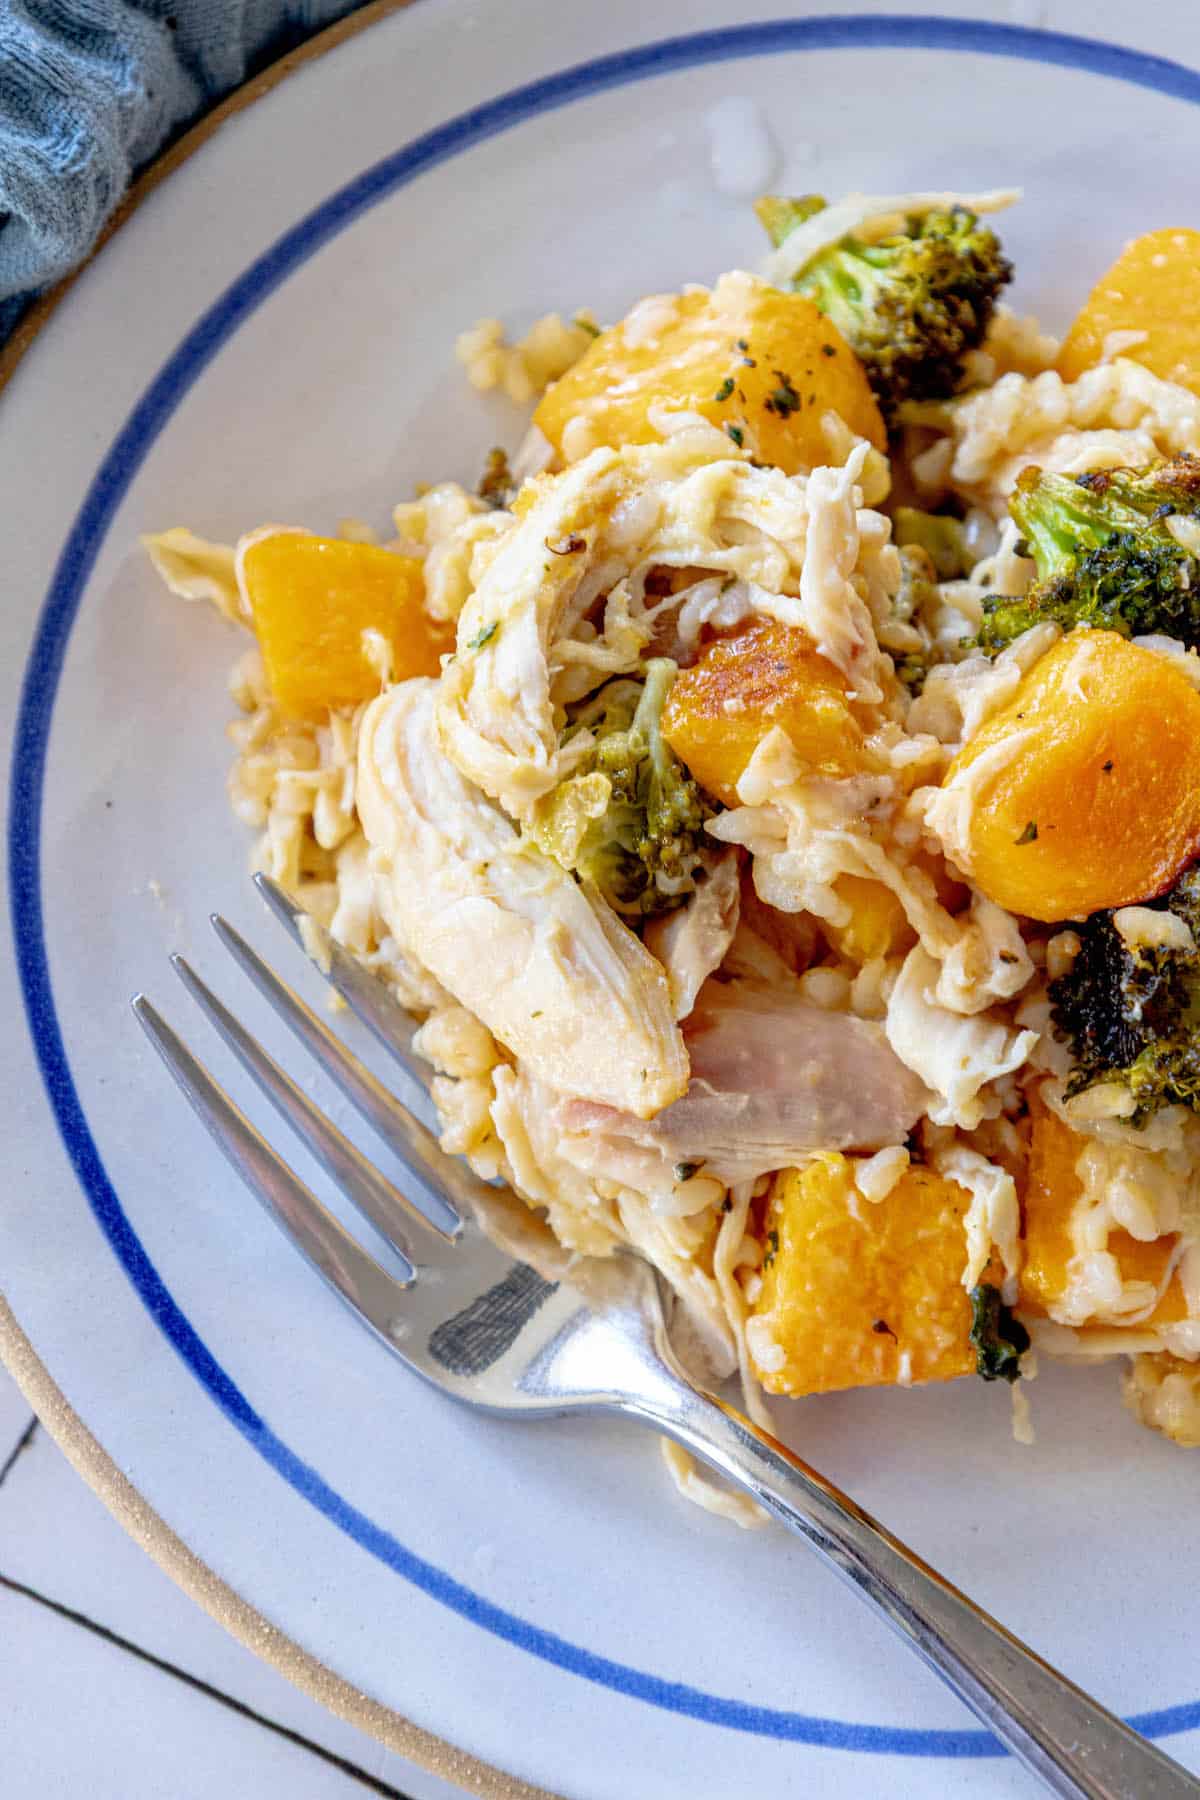 A plate with chicken, rice, and broccoli on it.